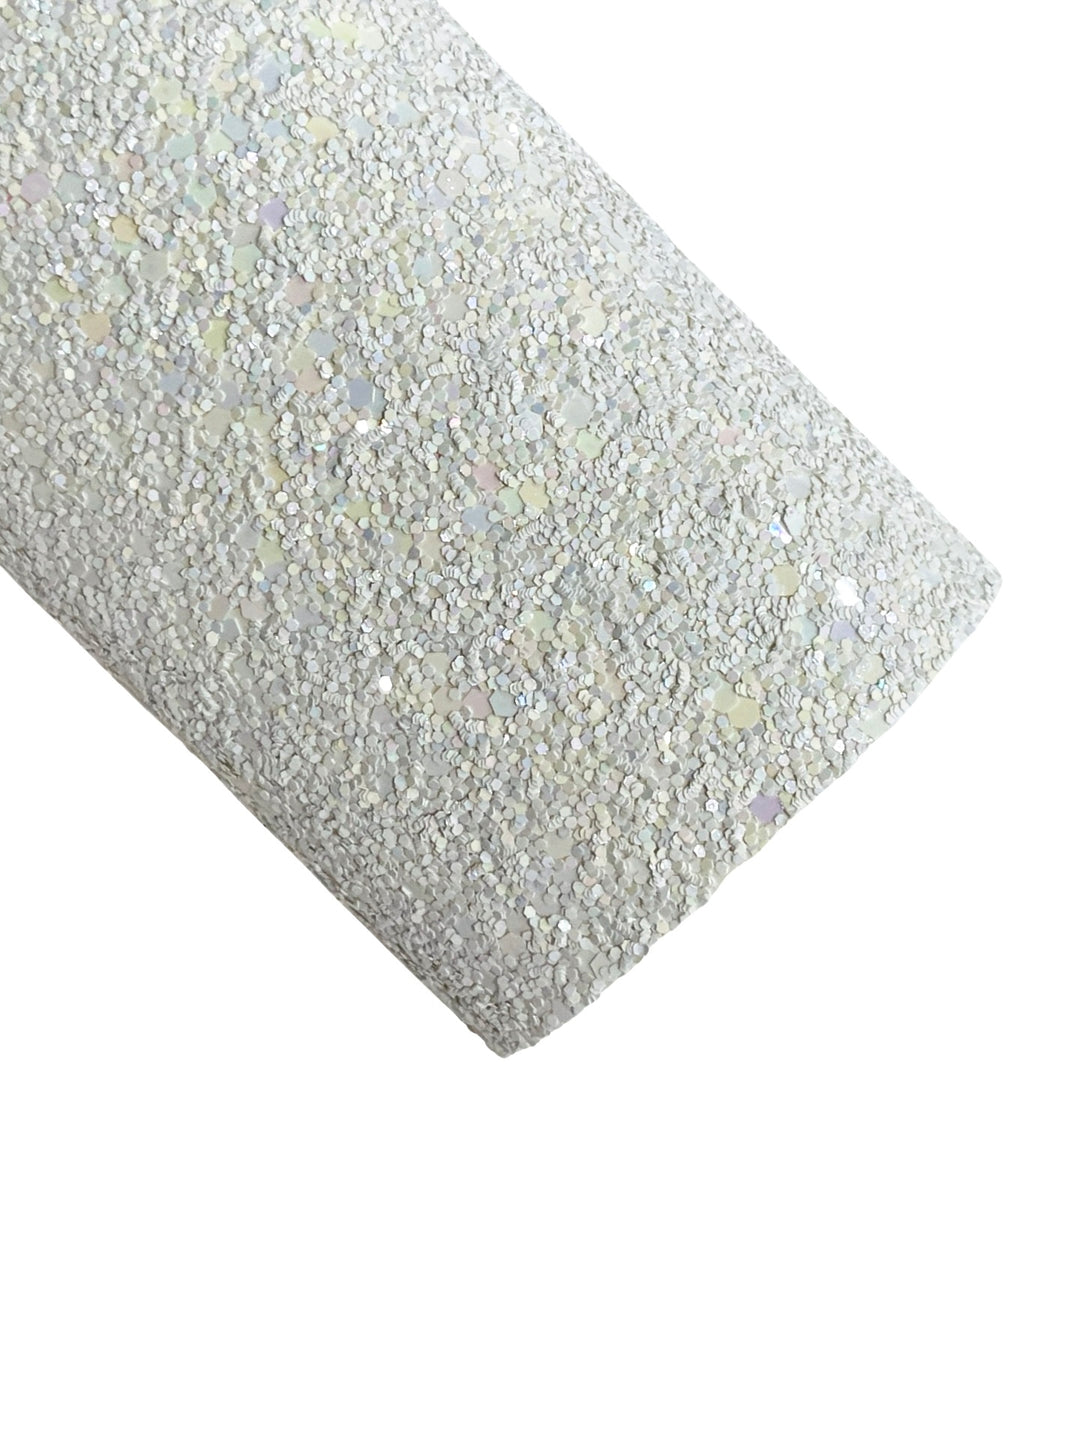 Angel White Glitter Fabric - now with white felt rear